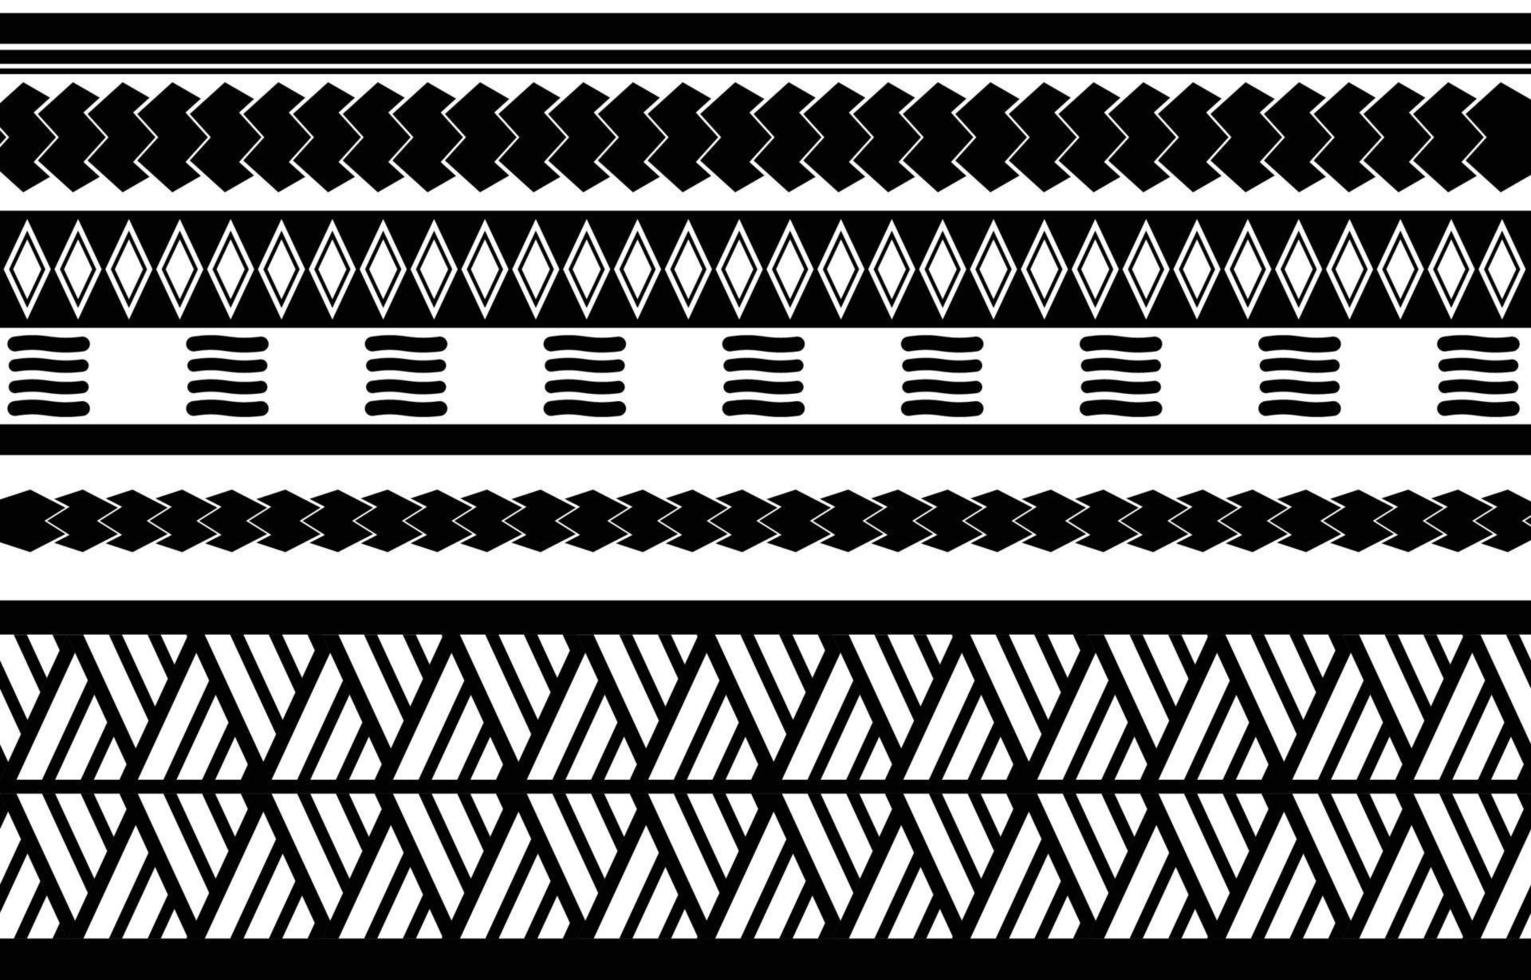 African tribal black and white abstract ethnic geometric pattern. design for background or wallpaper.vector illustration to print fabric patterns, rugs, shirts, costumes, turban, hats, curtains. vector